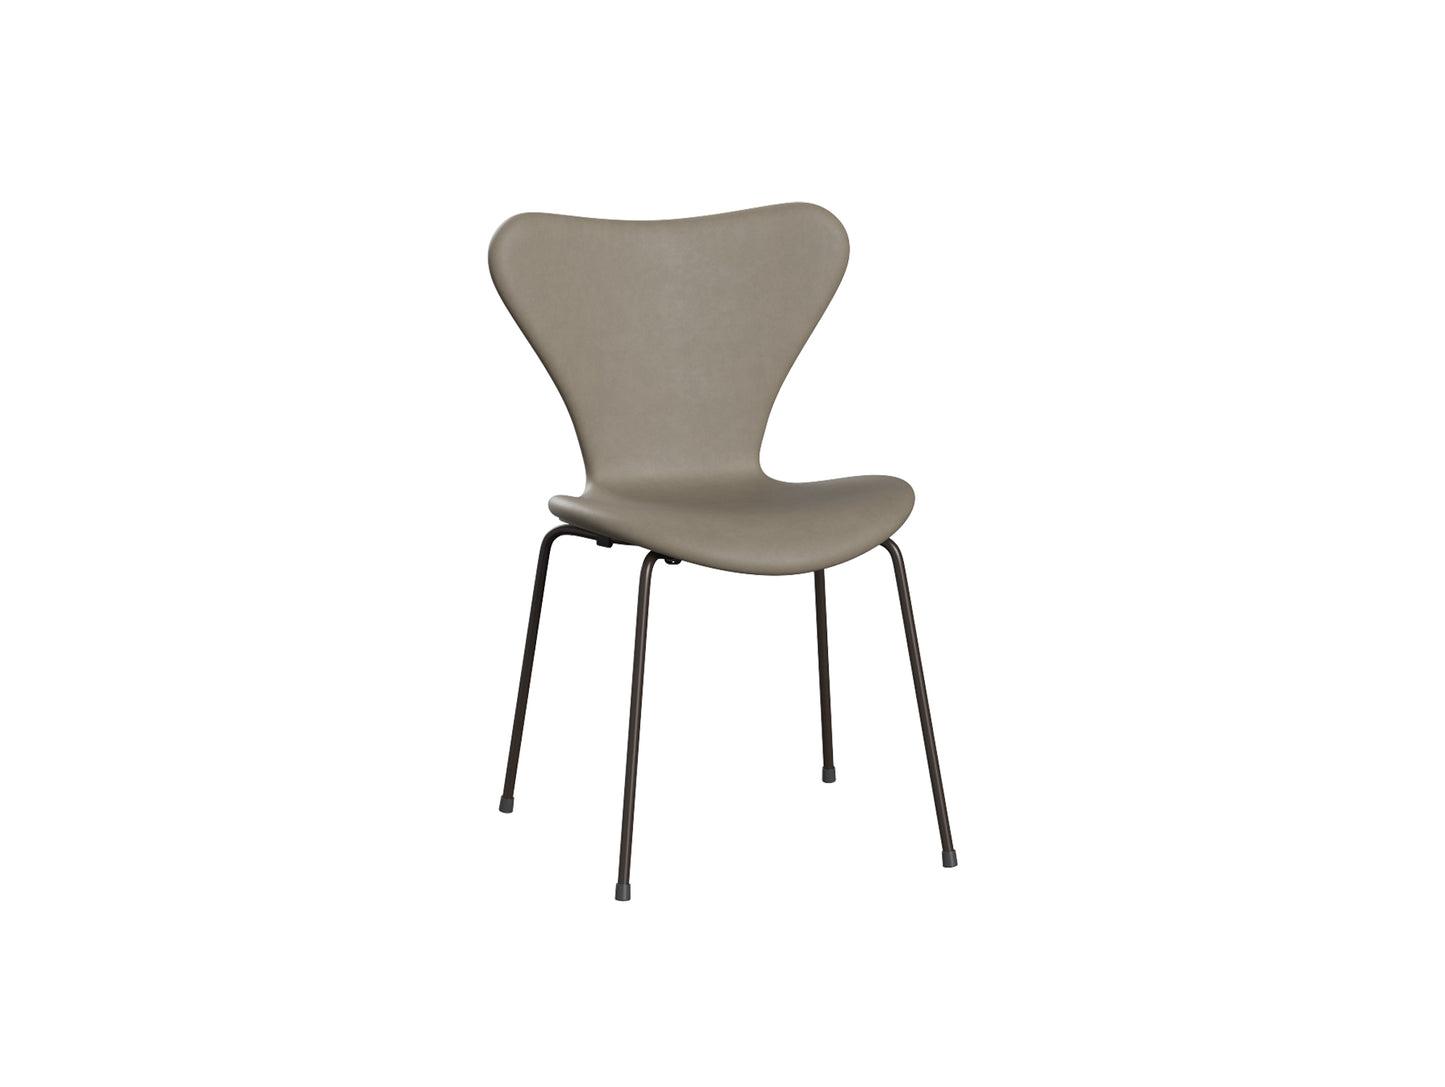 Series 7™ 3107 Dining Chair (Fully Upholstered) by Fritz Hansen - Brown Bronze Steel / Essential Light Grey Leather